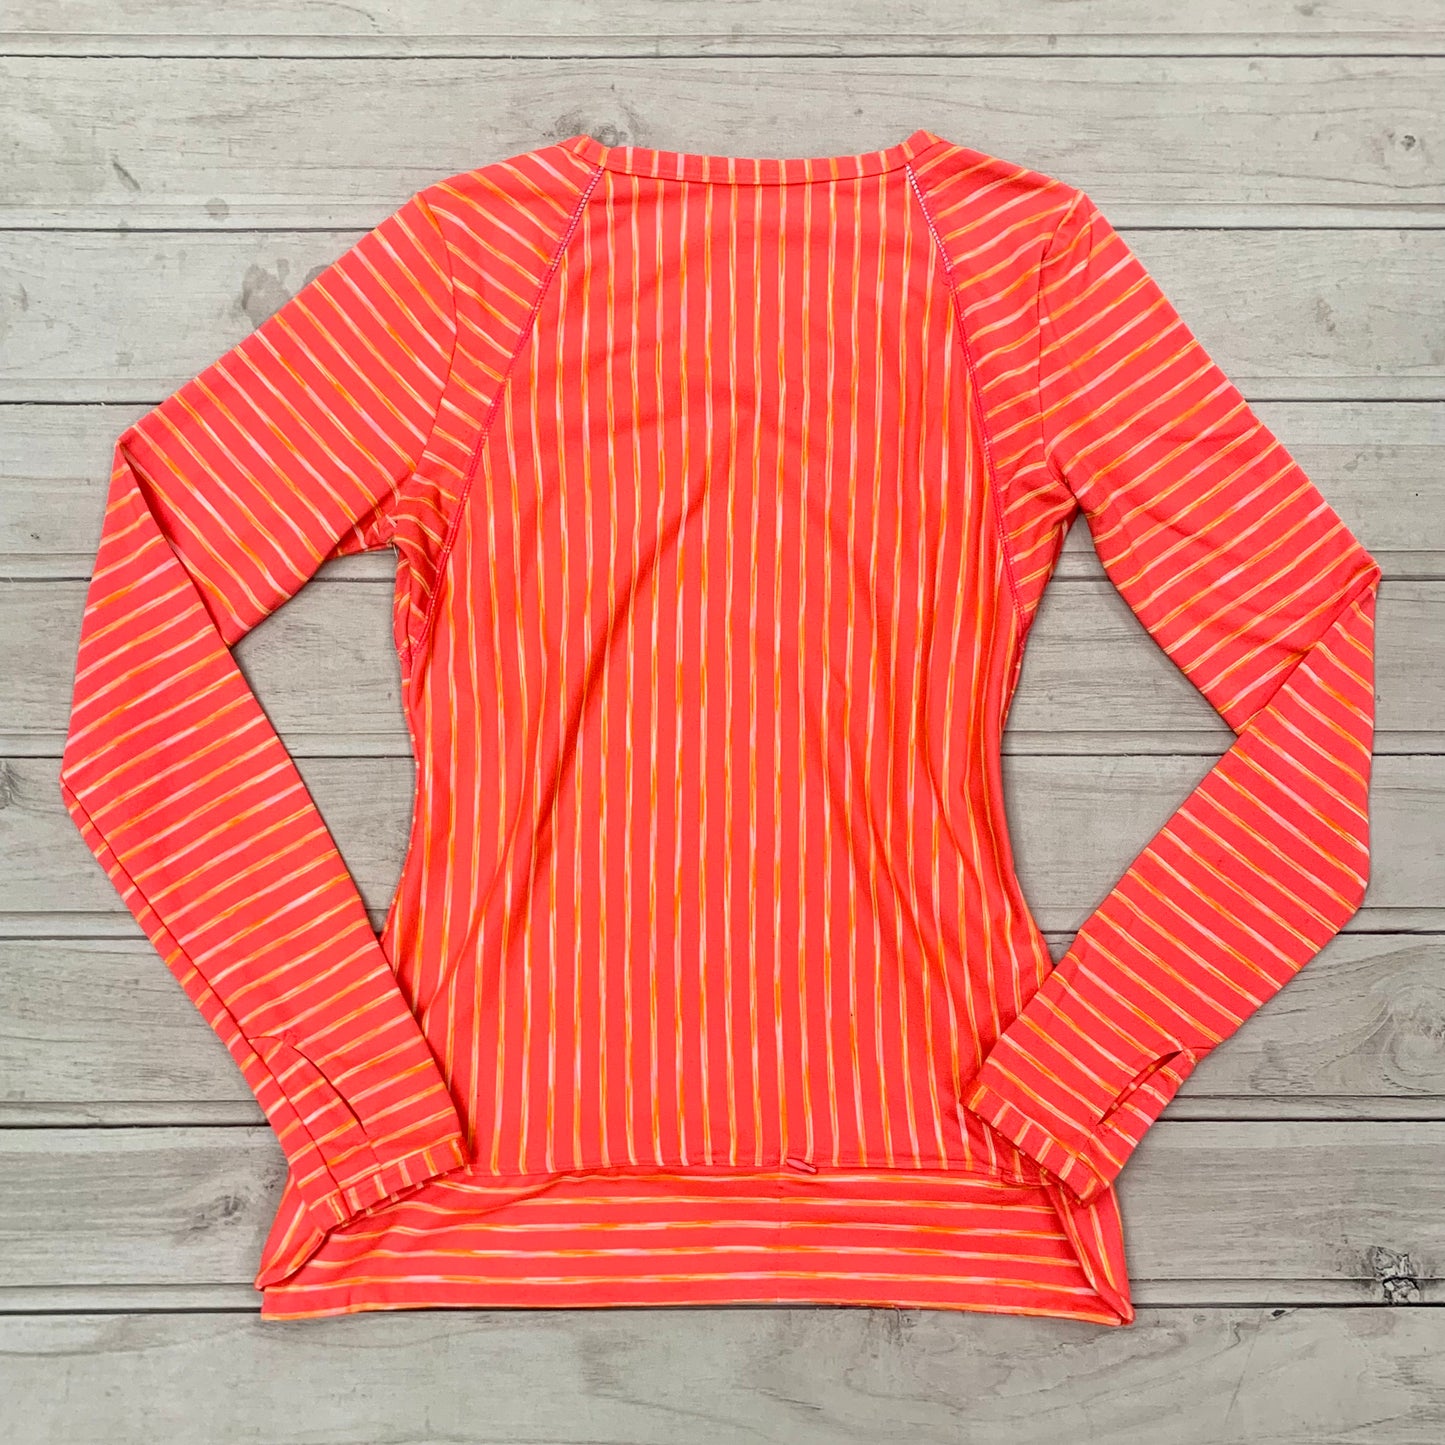 Athletic Top Long Sleeve Crewneck By Athleta  Size: Xs